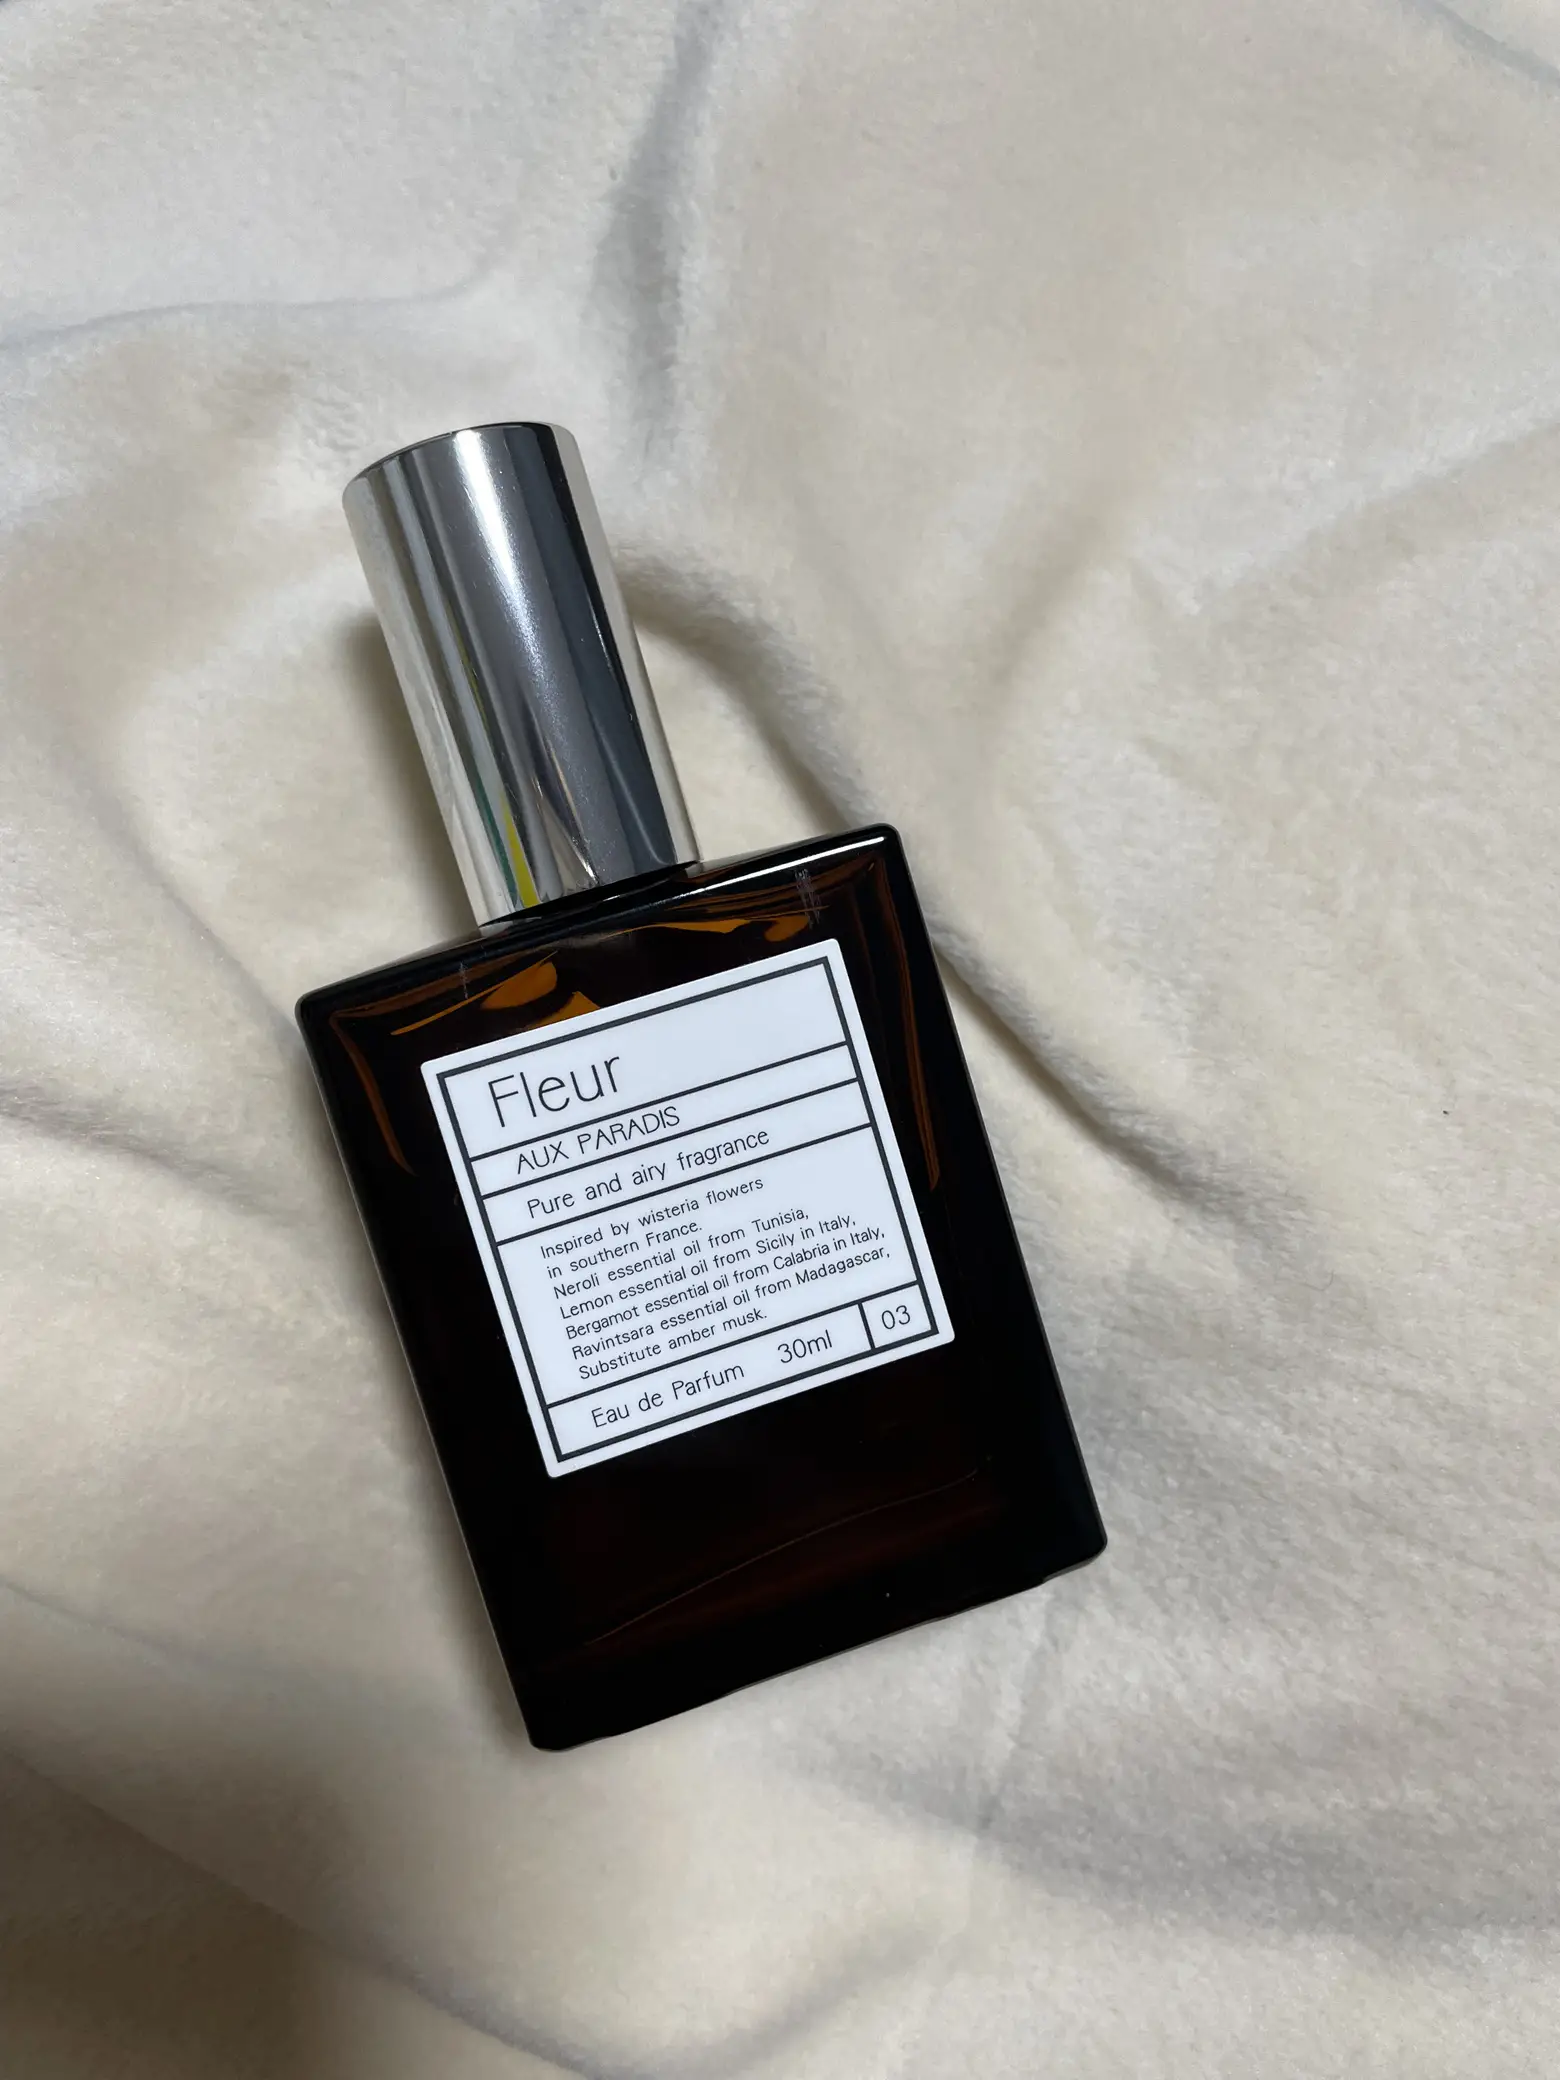 Irreplaceable scent ♡ | Gallery posted by alu | Lemon8